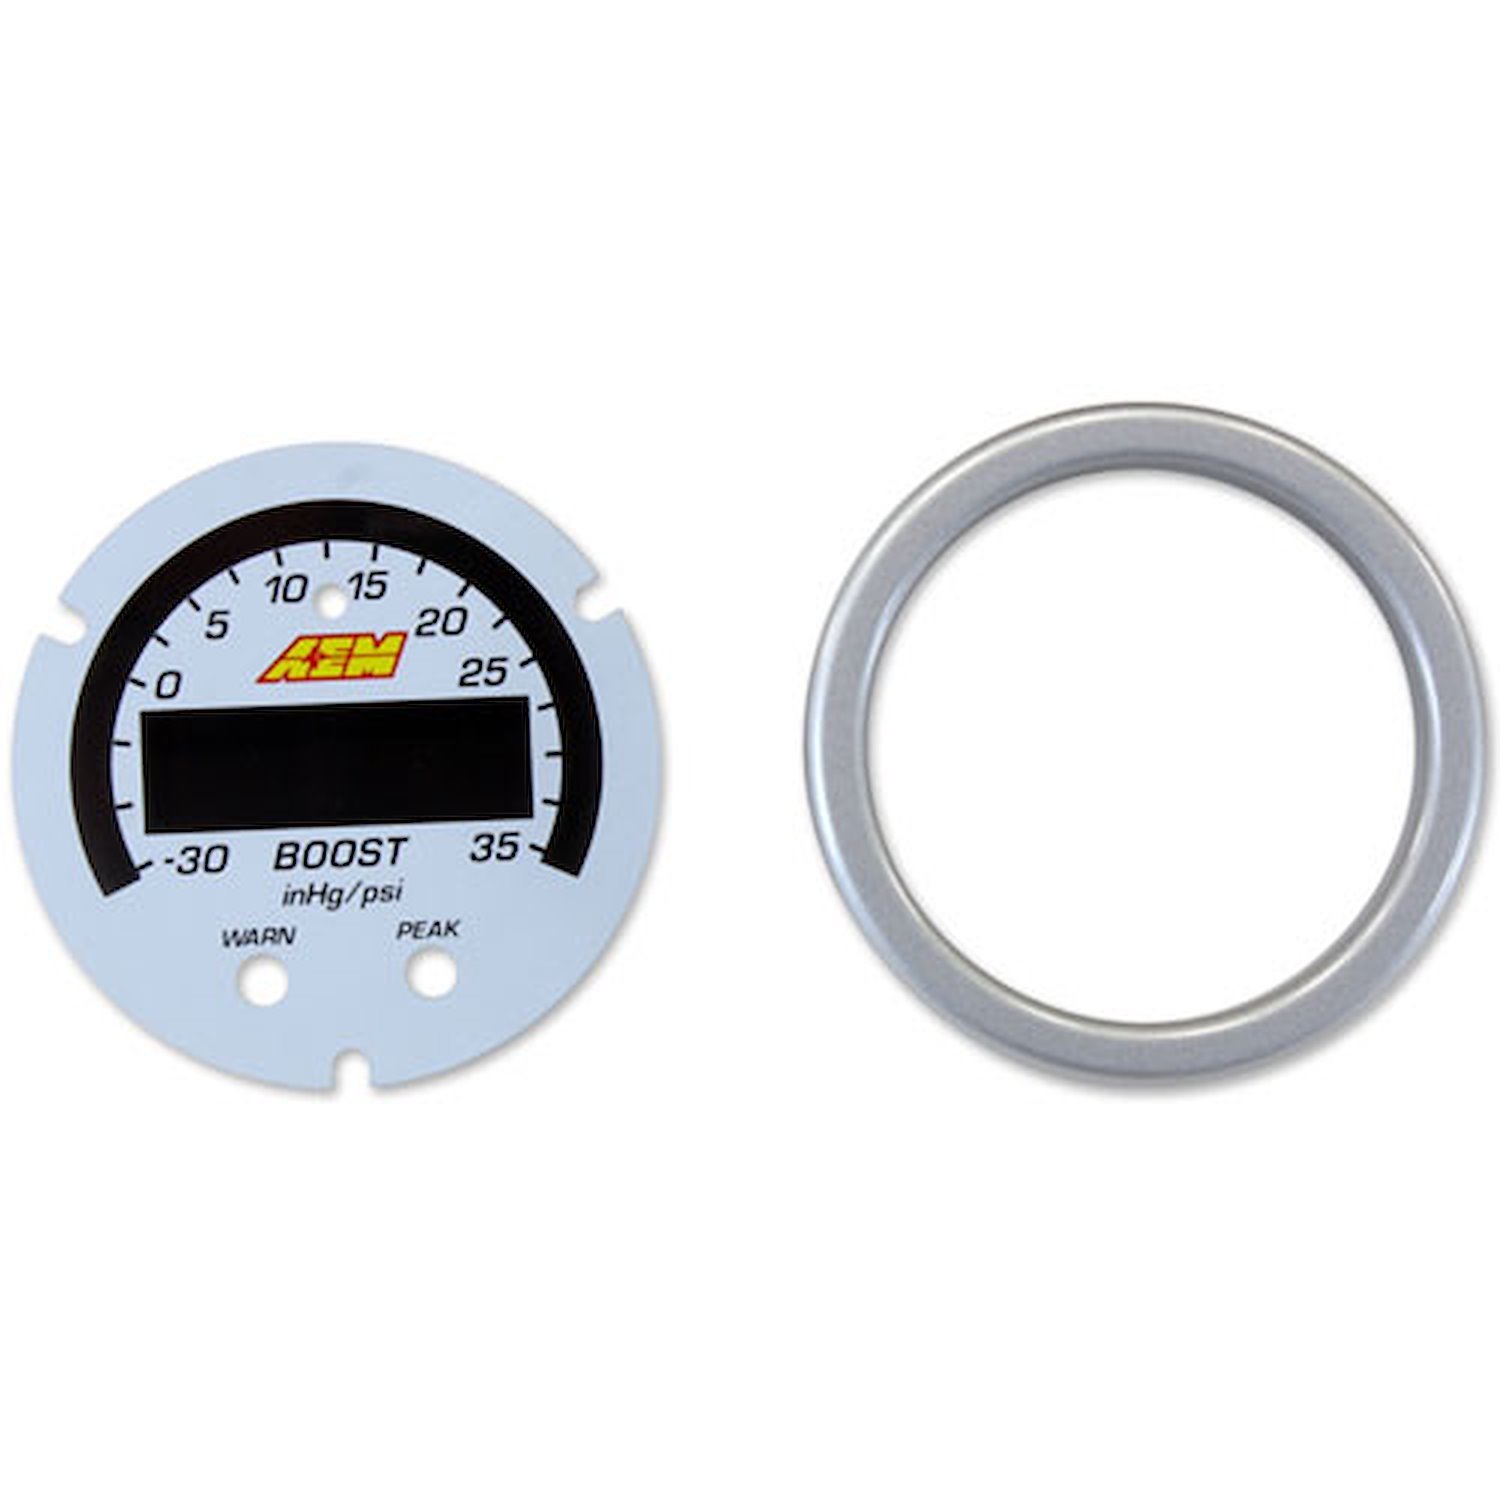 X-Series Boost Pressure Gauge Accessory Kit Includes Silver